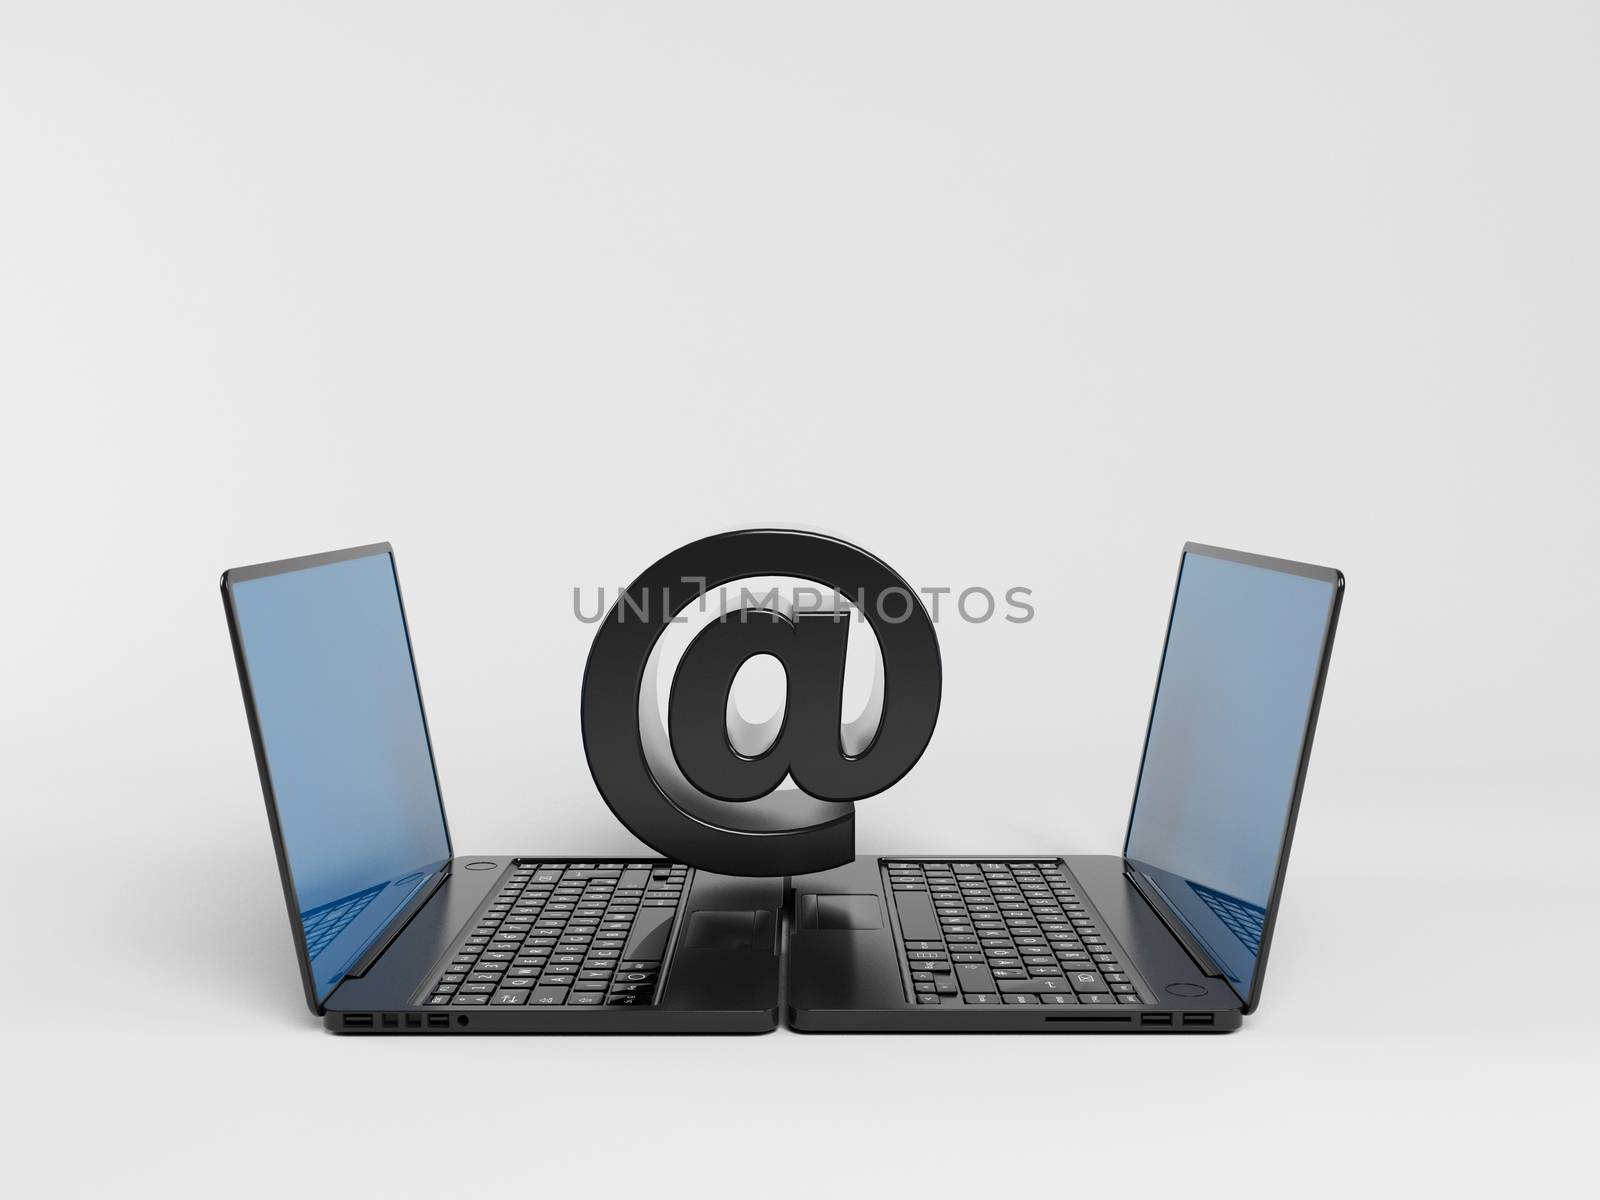 two laptops communicating with at symbol by fares139